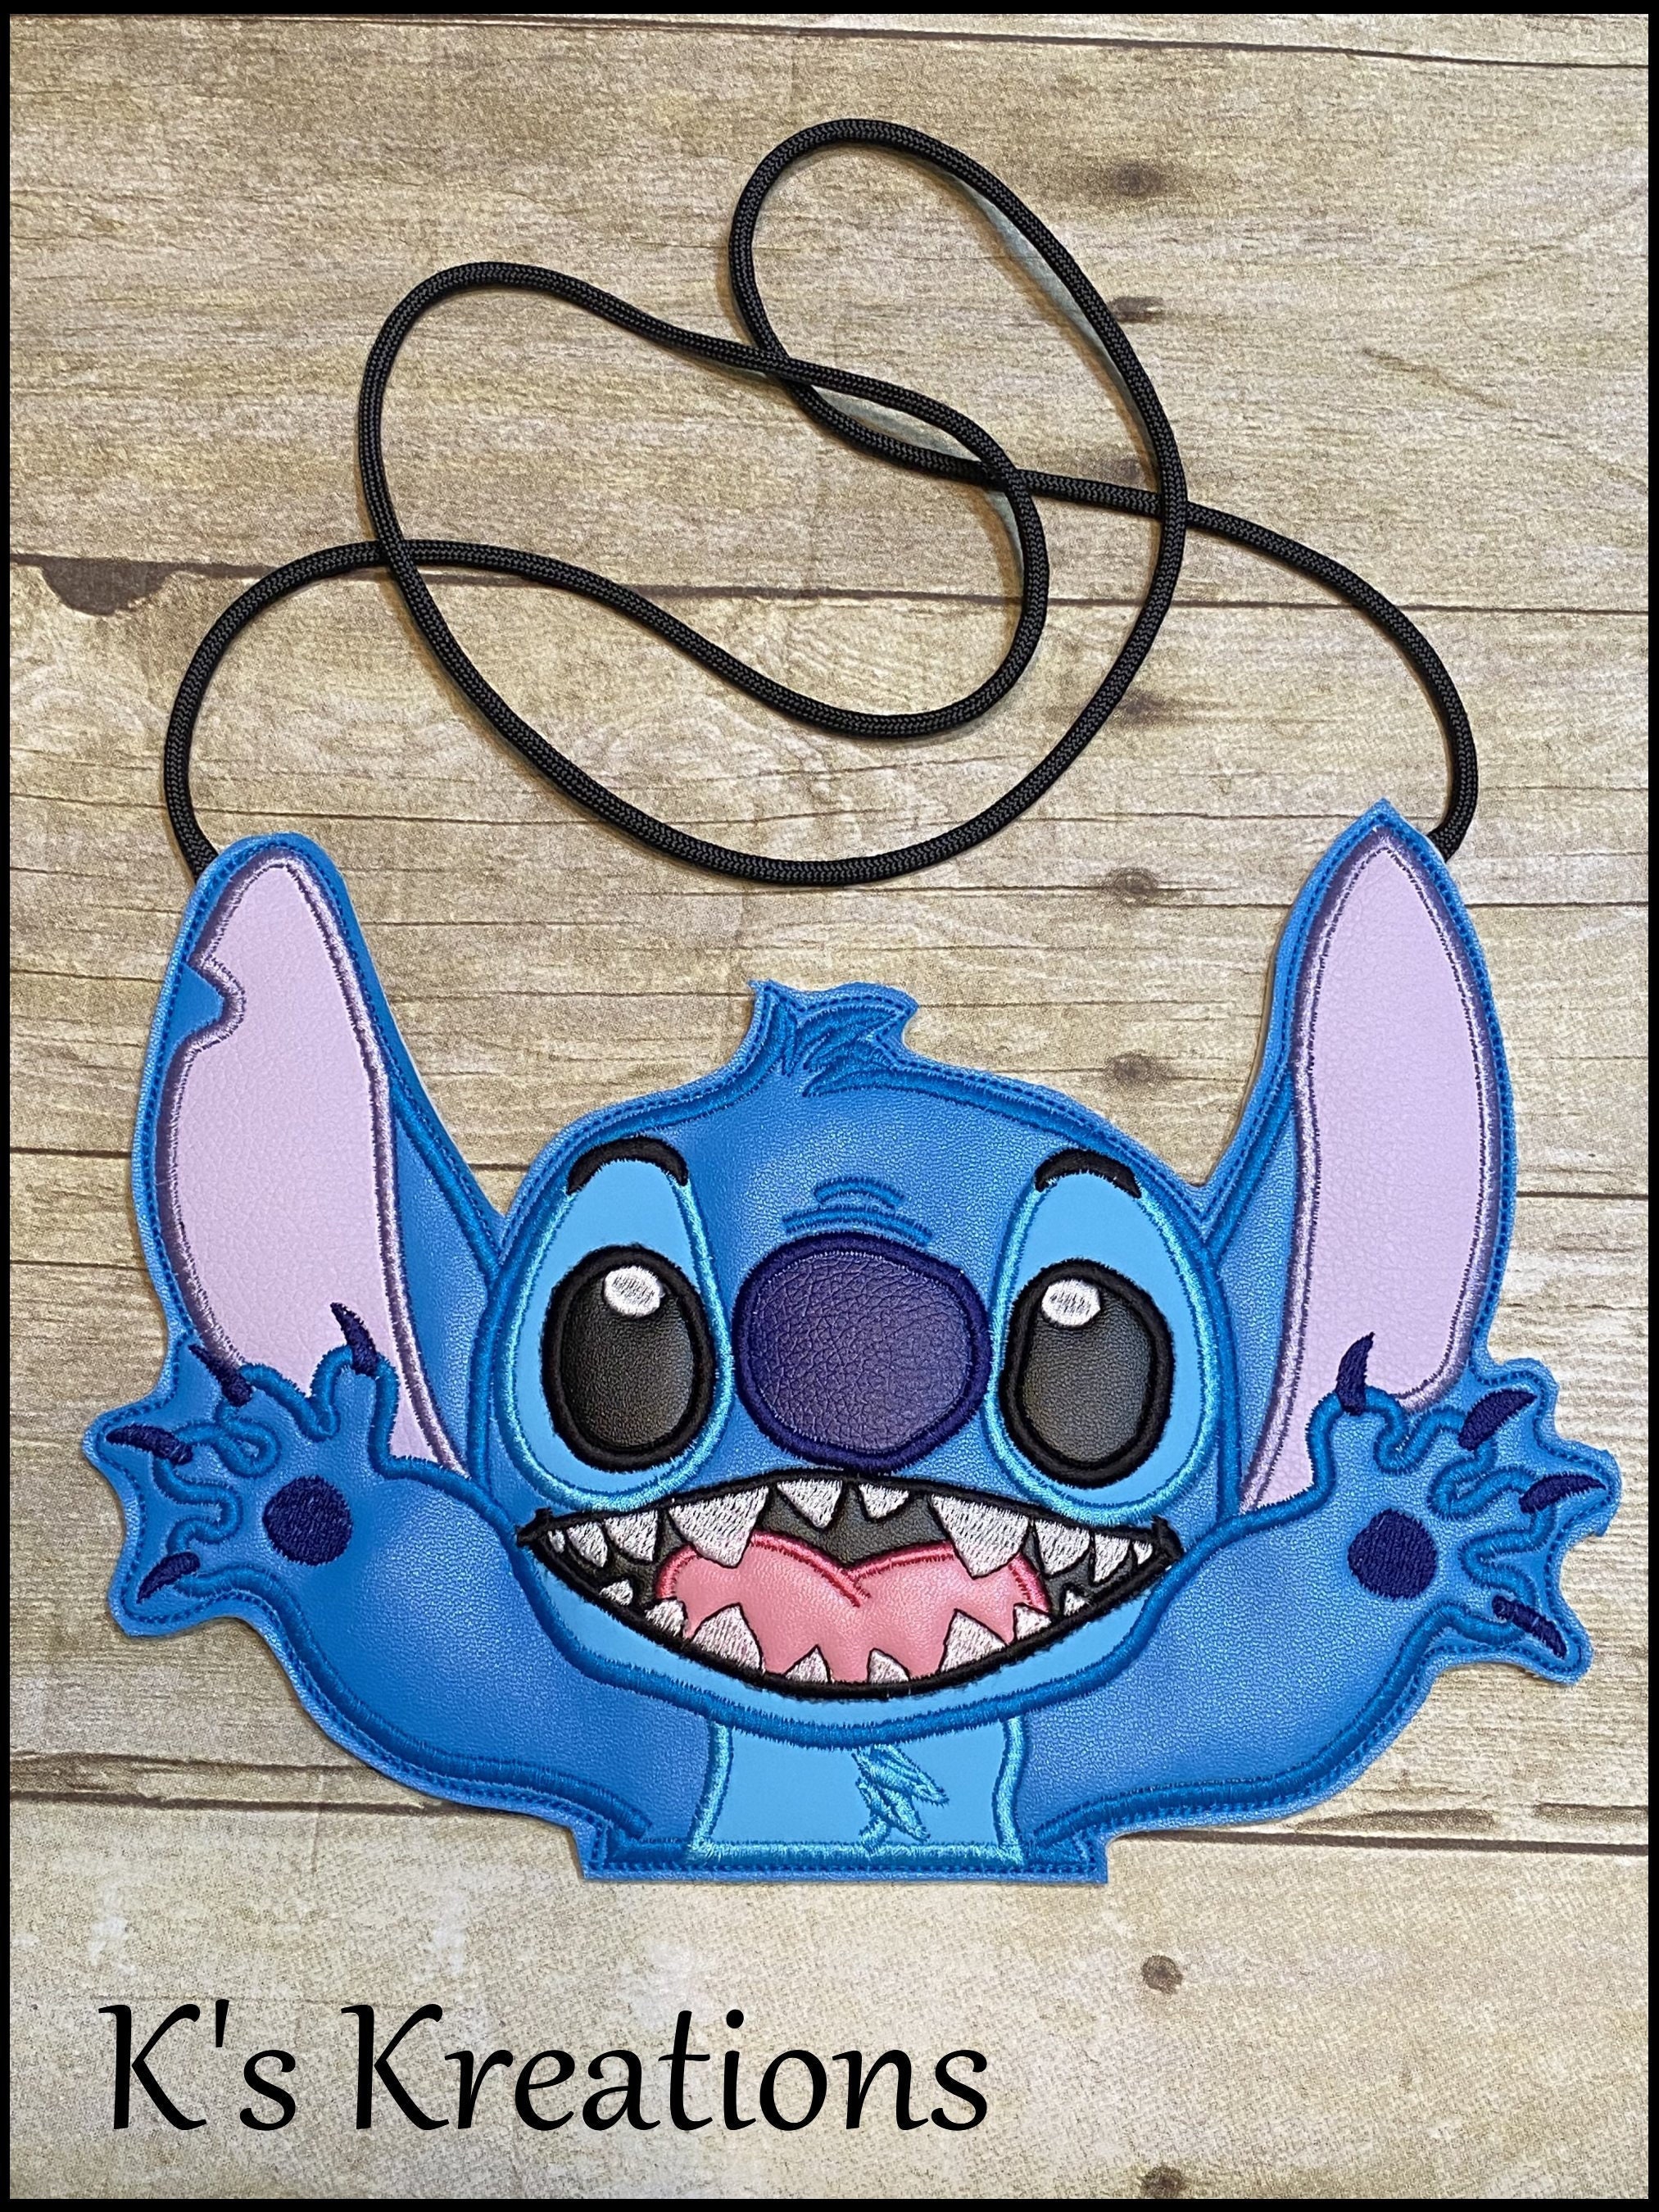 Stitch Cross Body Bag with Shoulder Strap,ANEIMIAH Lilo and Stitch Kawaii  Sling Bag Cute Anime Coin Money Crossbody Purse Birthday Gifts for Girls